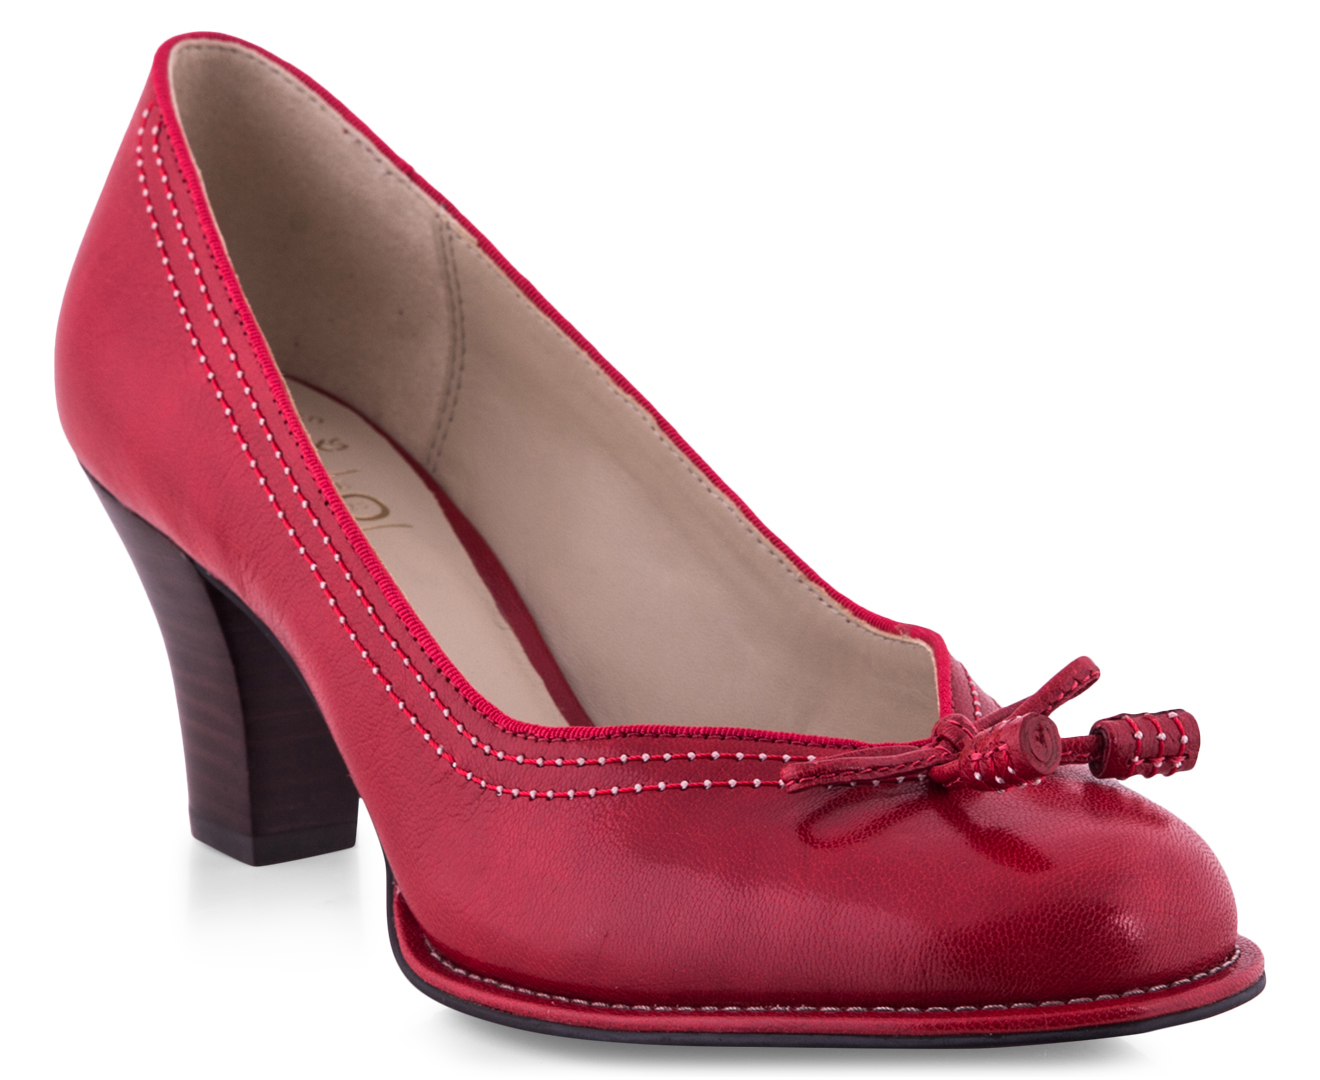 engañar Reductor Evaluable Clarks Women's Bombay Lights Shoes - Cherry Red | Www.catch.com.au